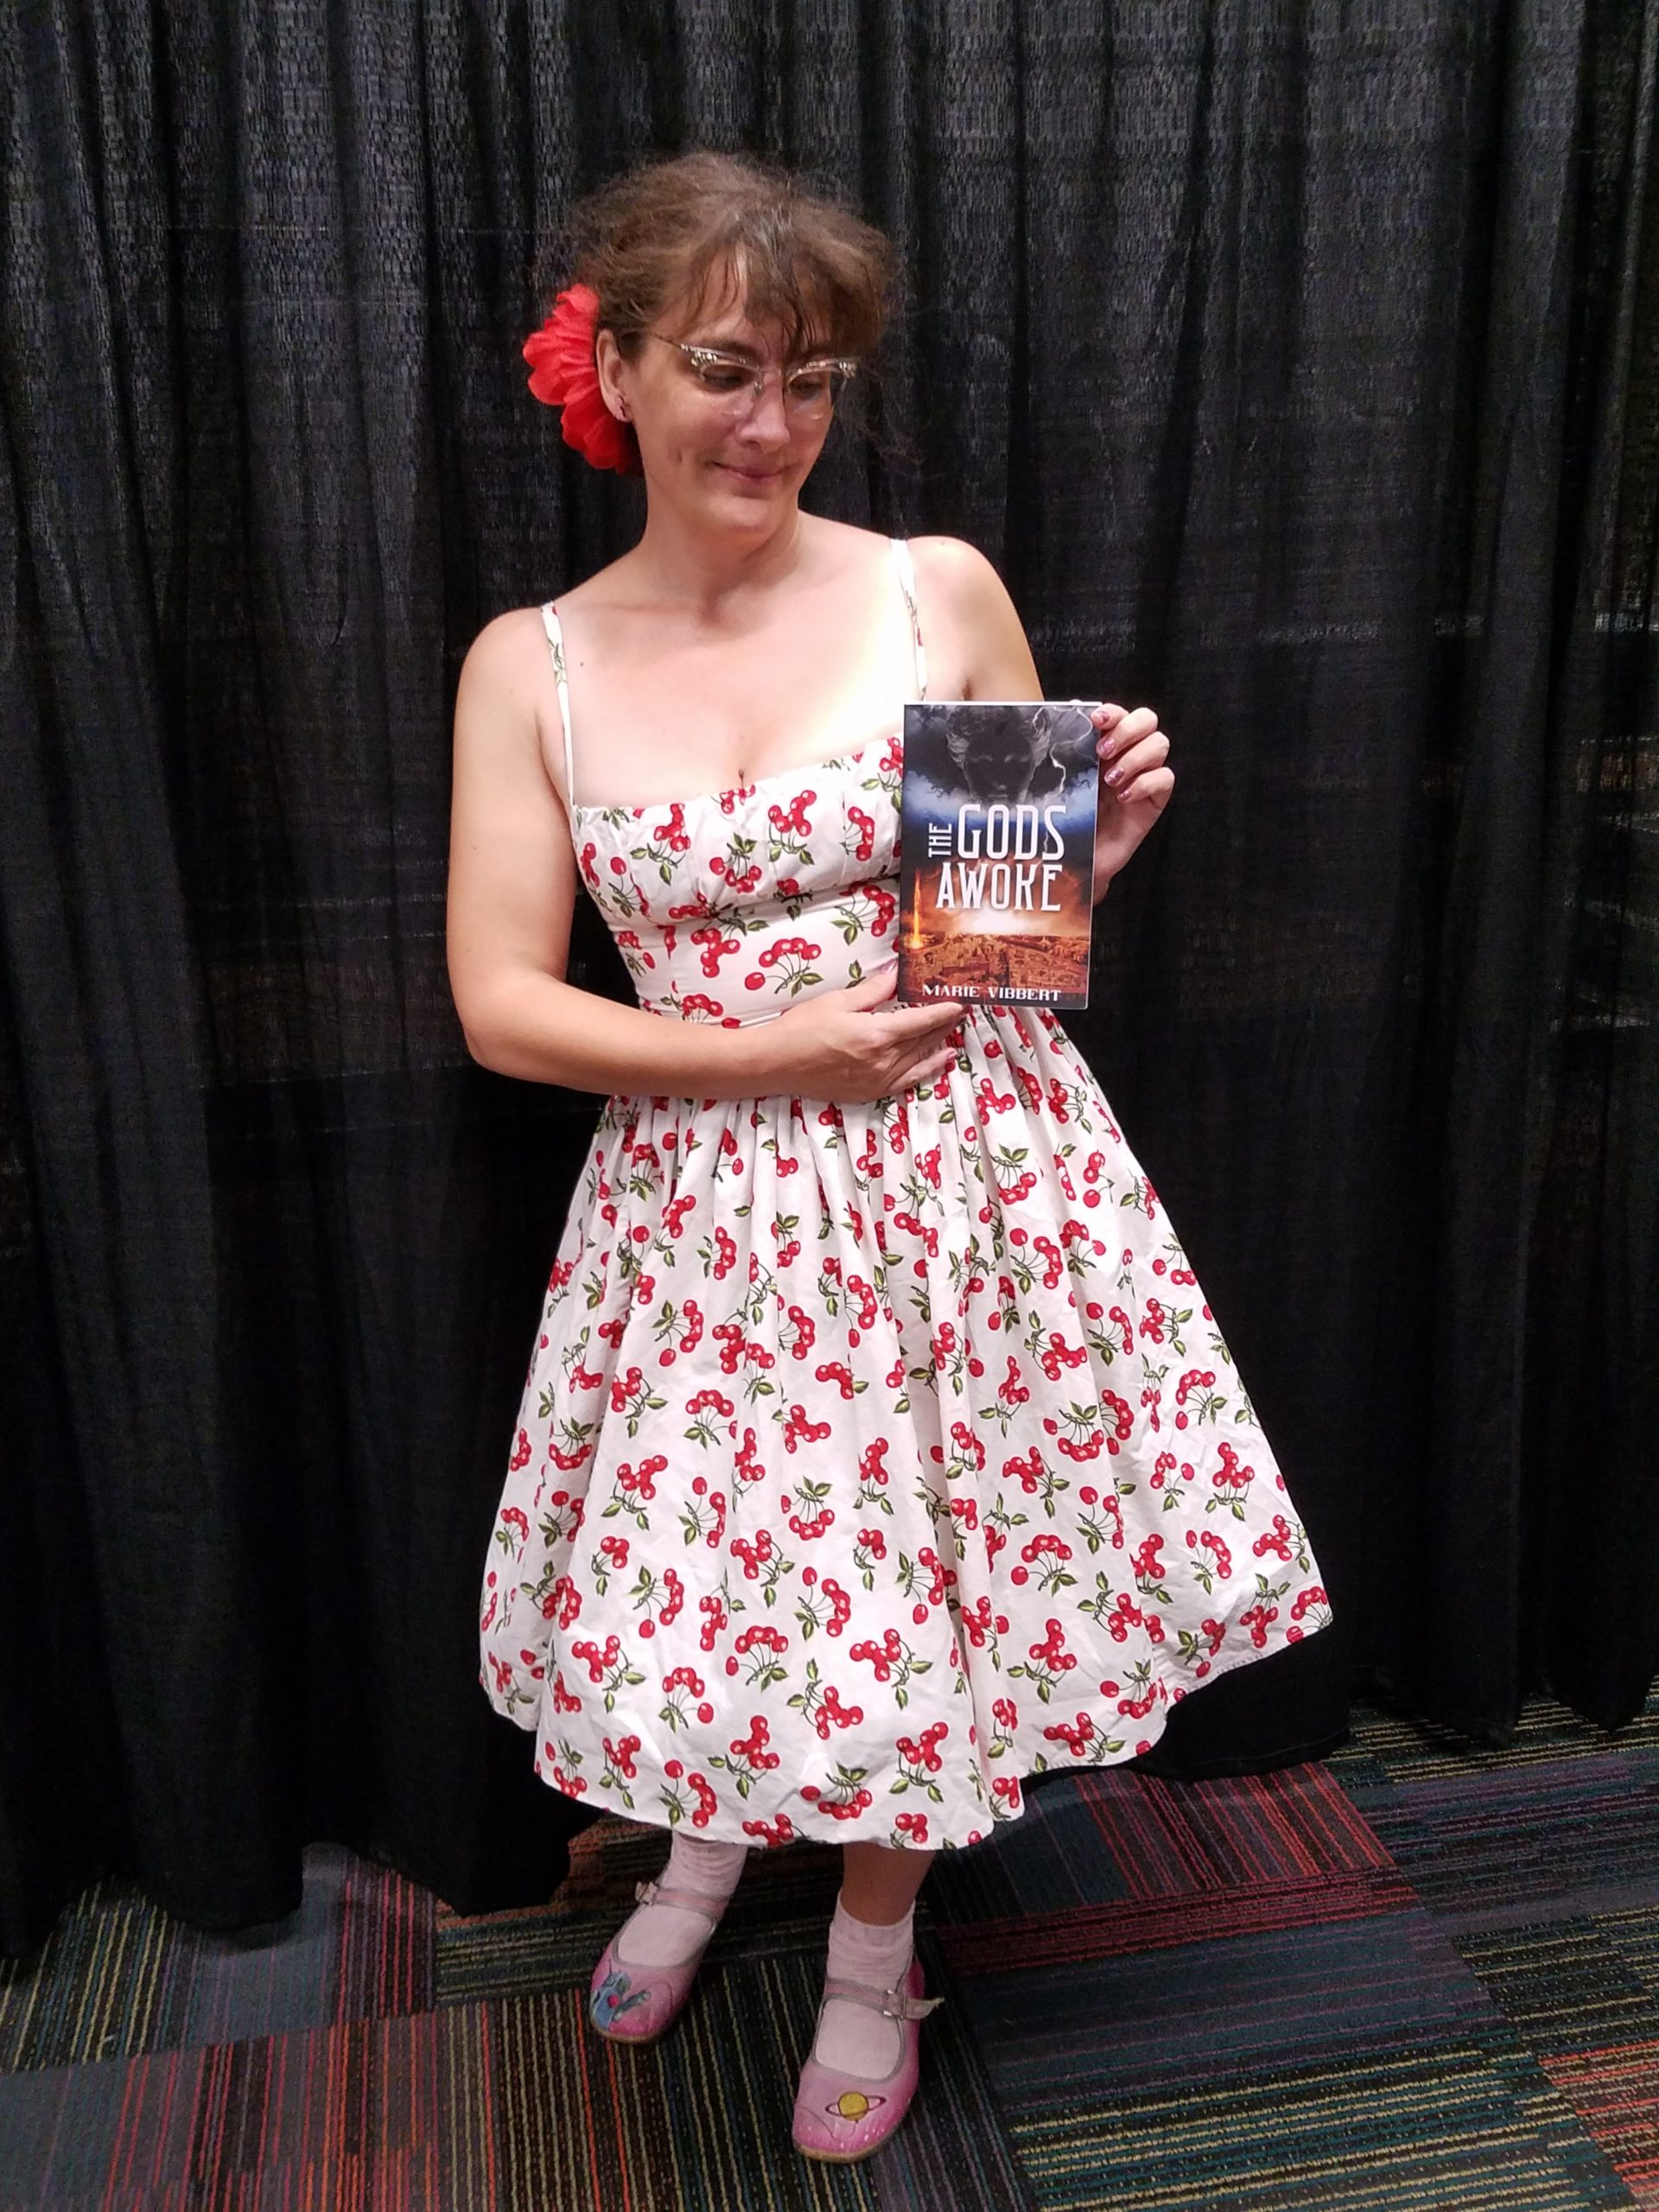 Marie holds her book in front of a plain black curtain